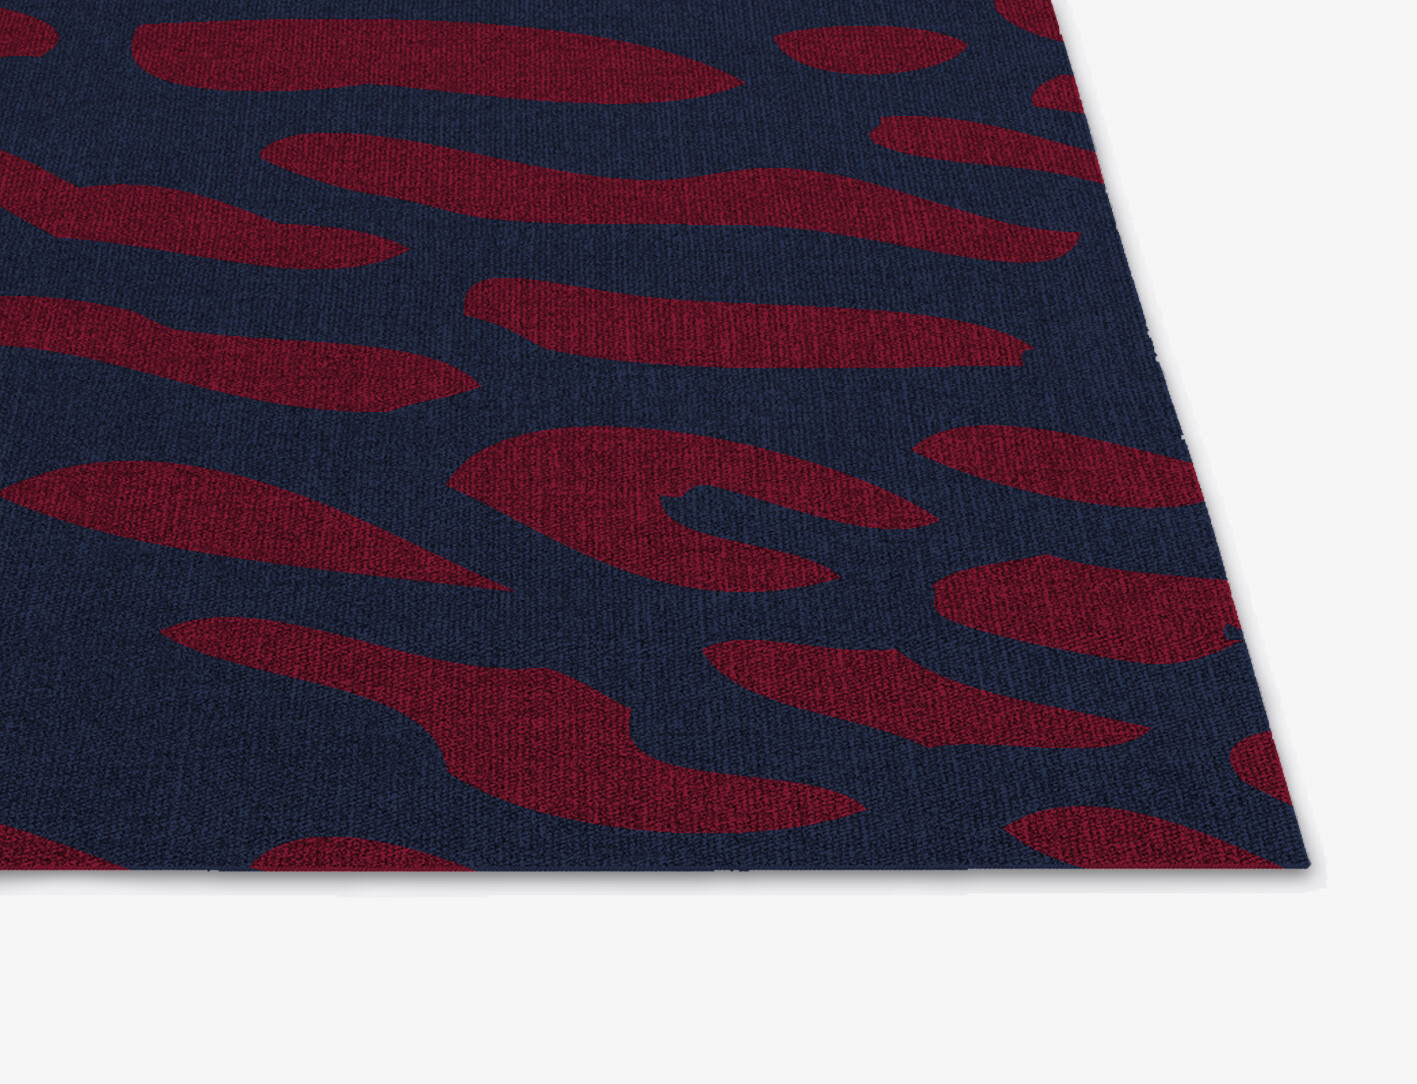 Ramp Abstract Square Outdoor Recycled Yarn Custom Rug by Rug Artisan